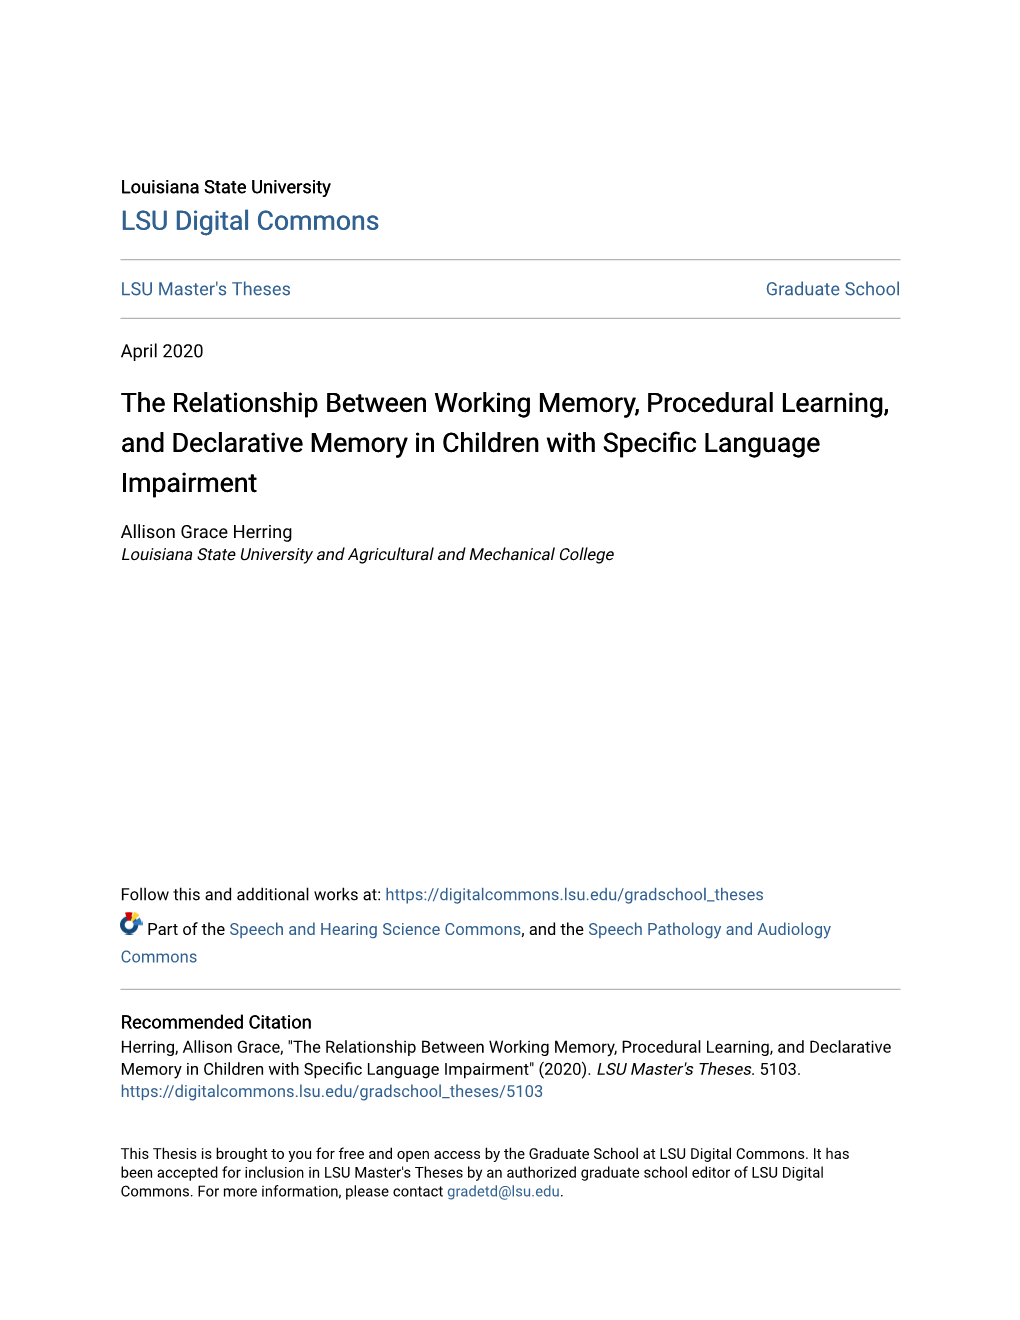 The Relationship Between Working Memory, Procedural Learning, and Declarative Memory in Children with Specific Language Impairment